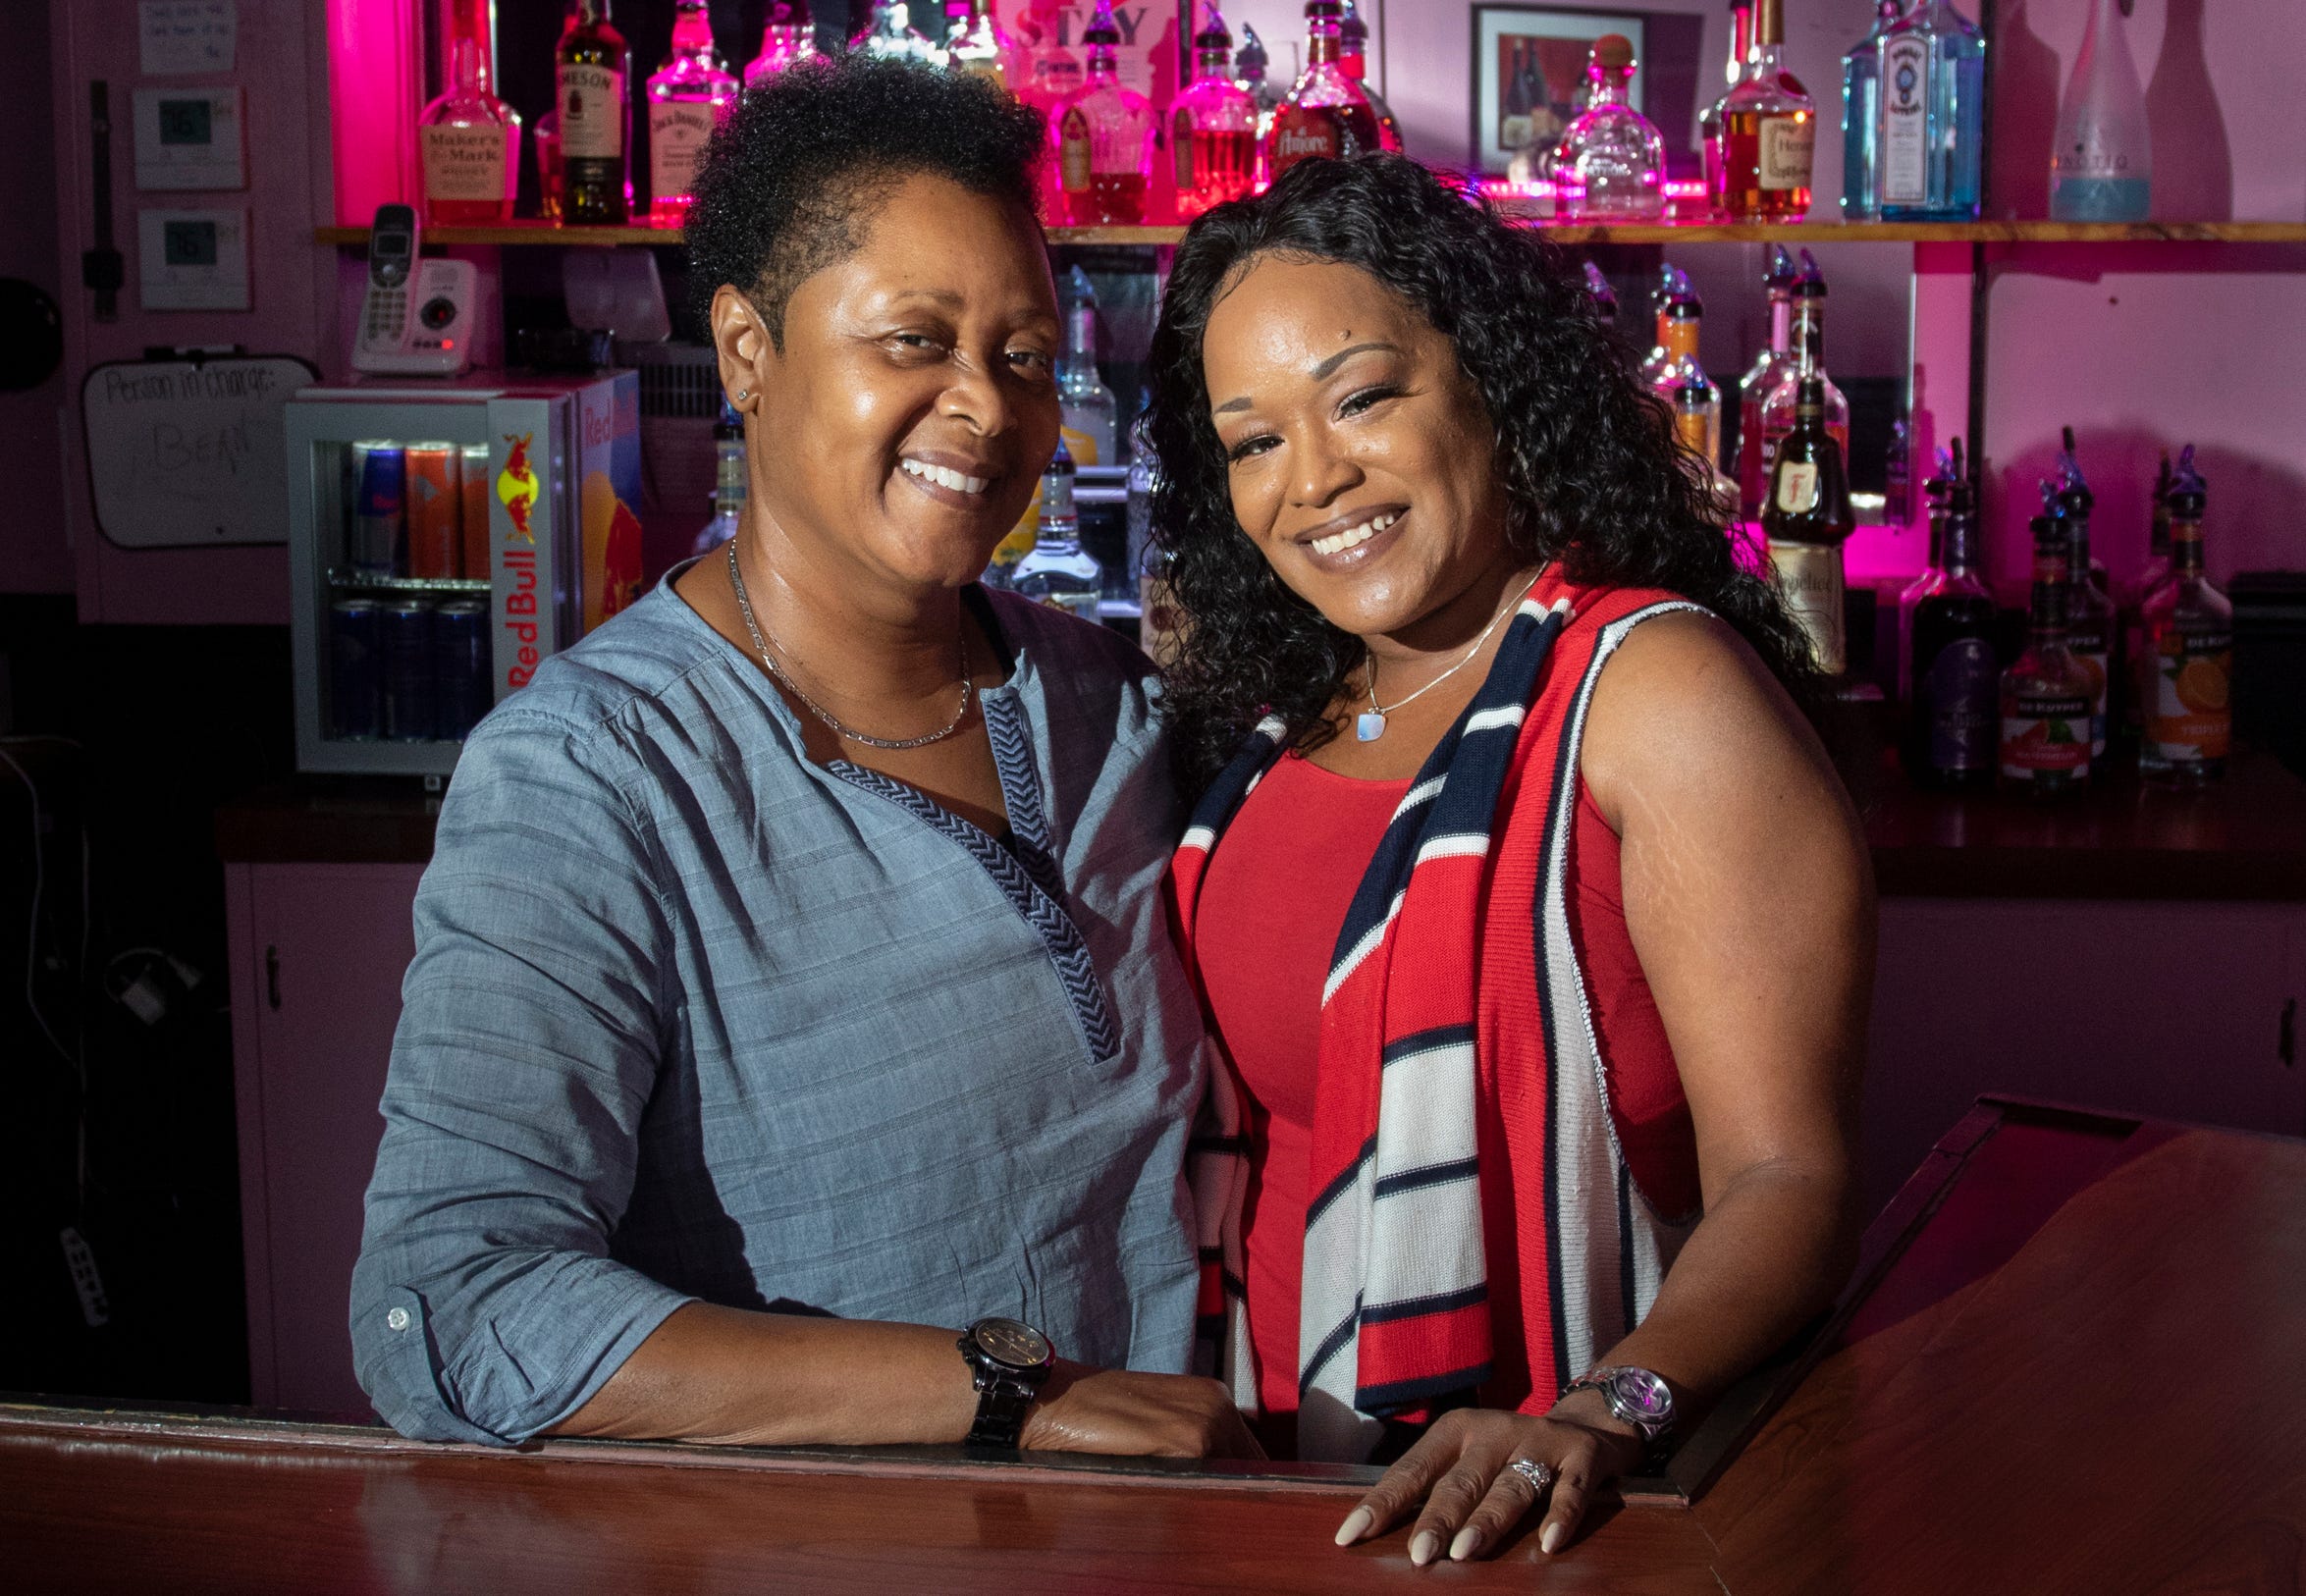 Last call for lesbian bars: the ever-changing nightlife for LGBTQ